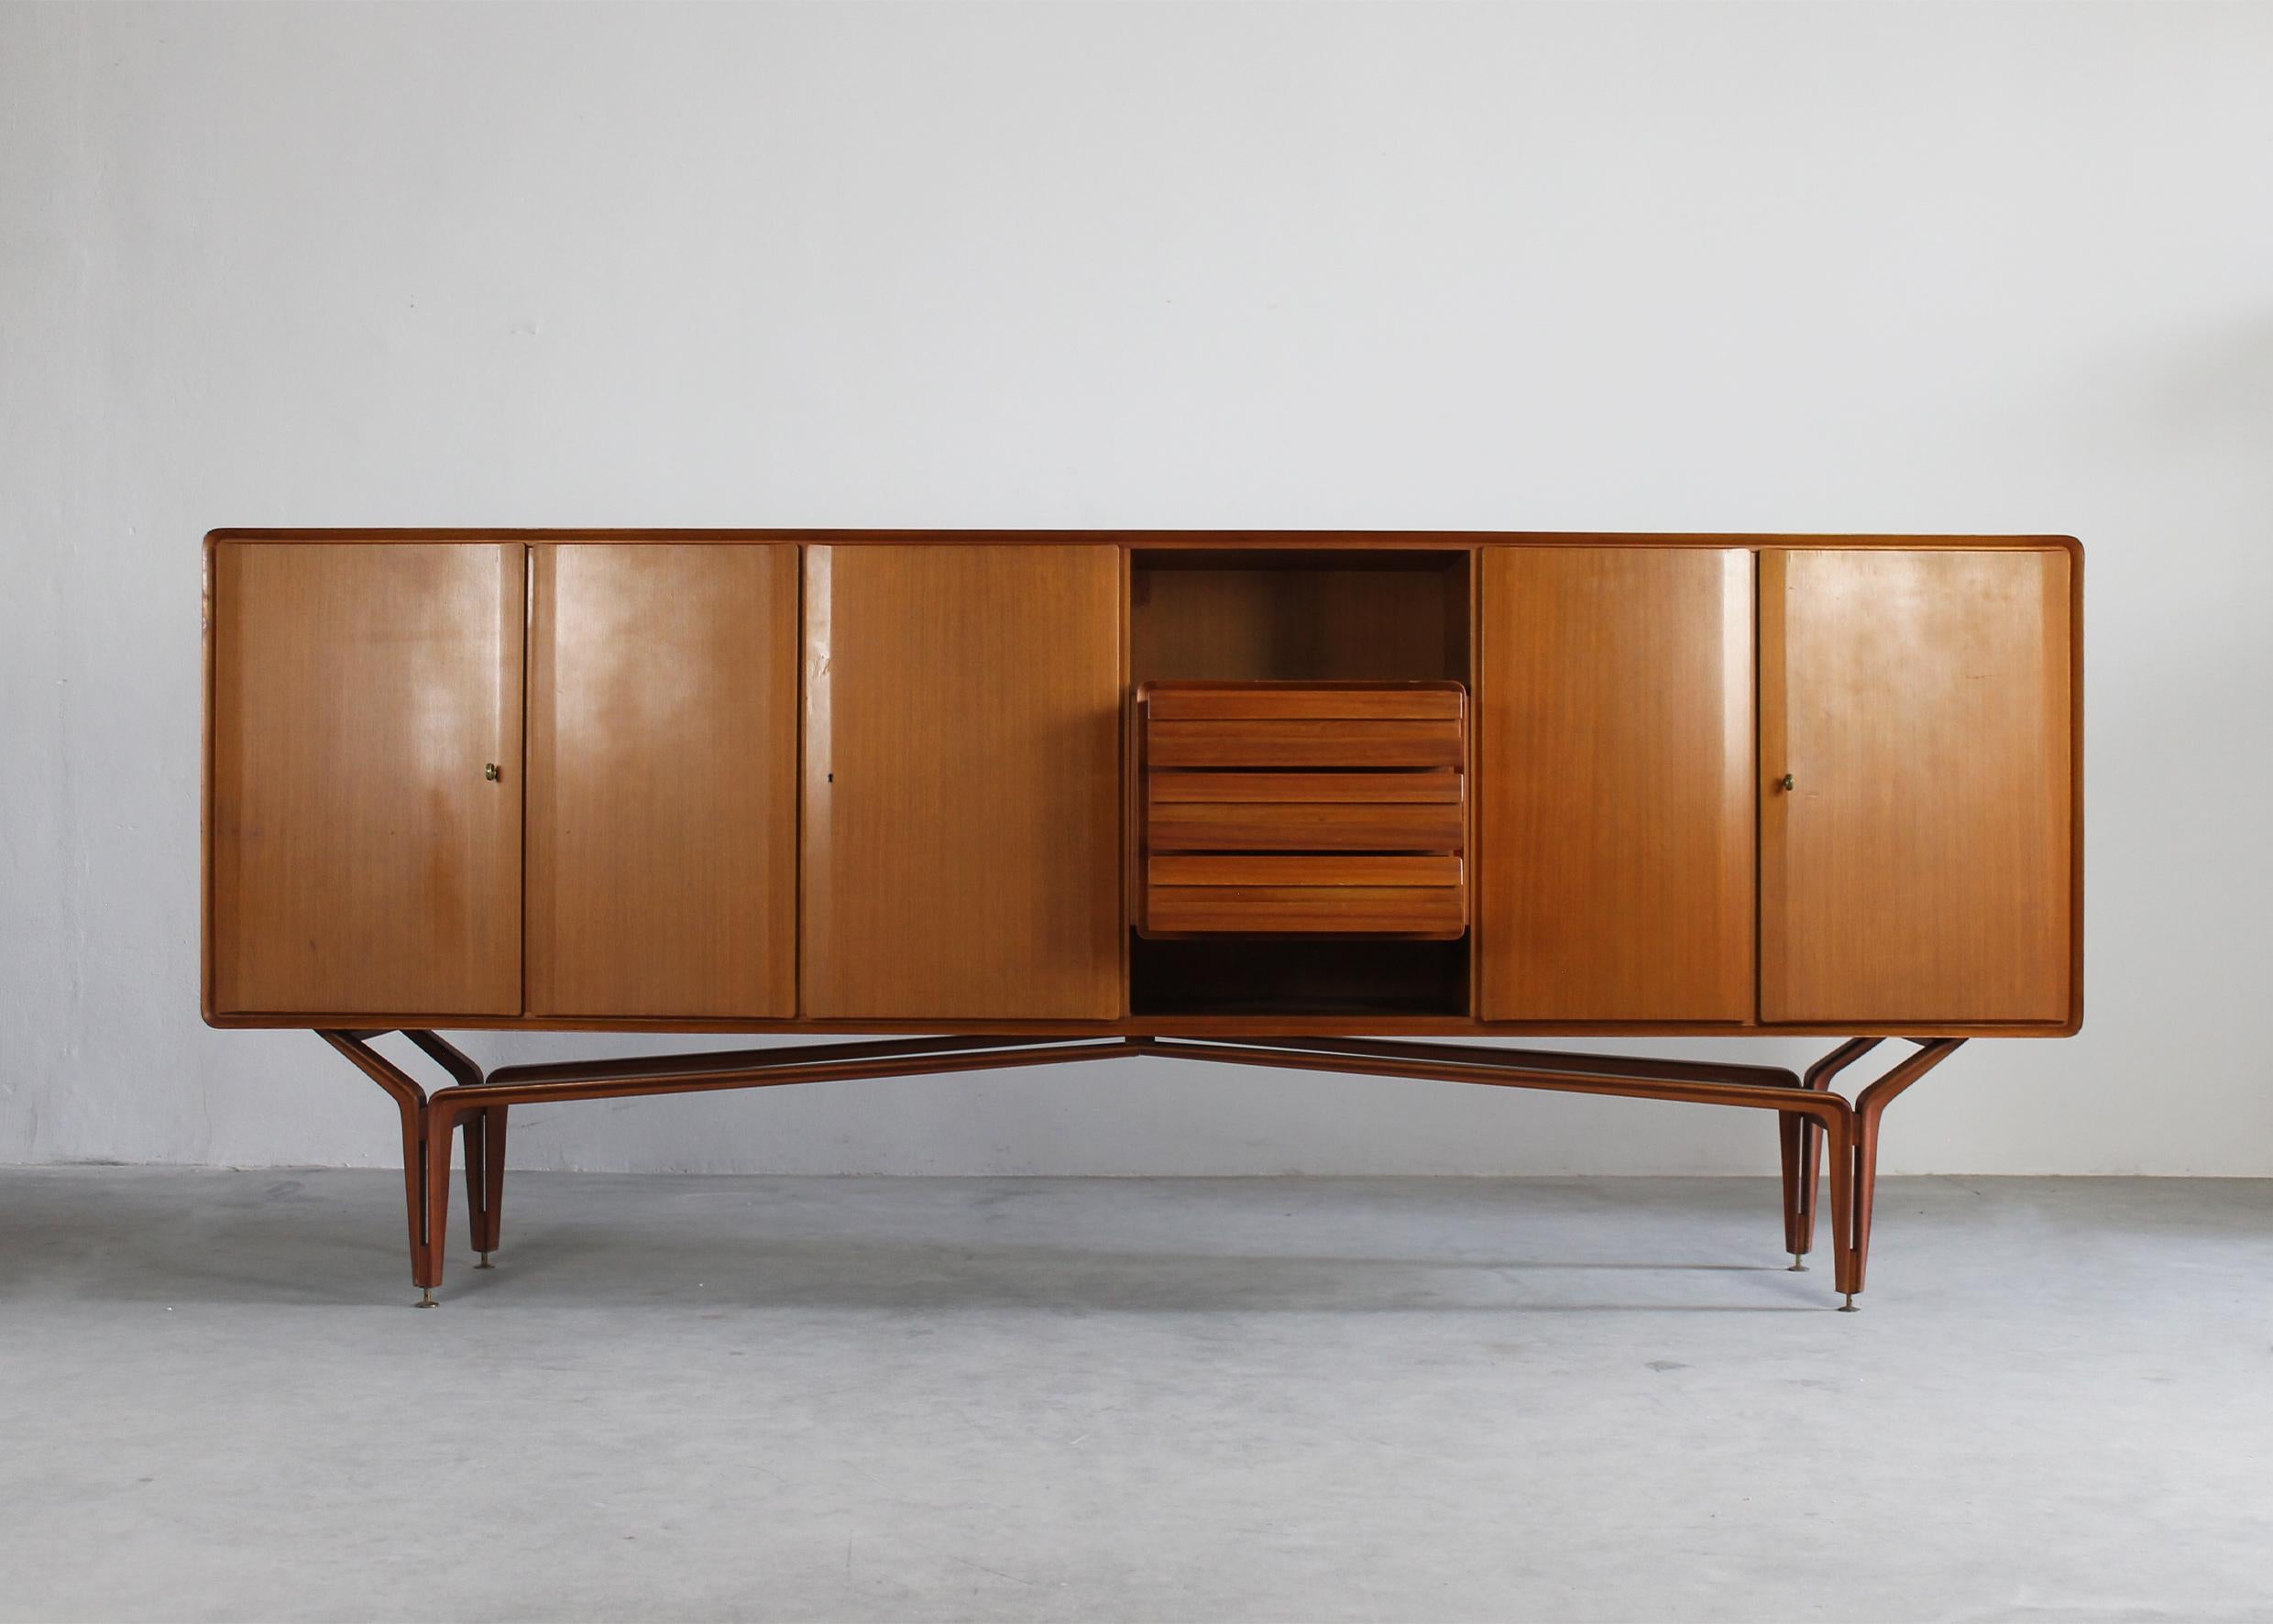 Wooden sideboard with three storage units (two larger and one small) and three frontal drawers with a structure entirely realized in wood and brass details (keys and feet). 
Manufactured by Galleria Mobili d'Arte in Cantù, Italy, during the